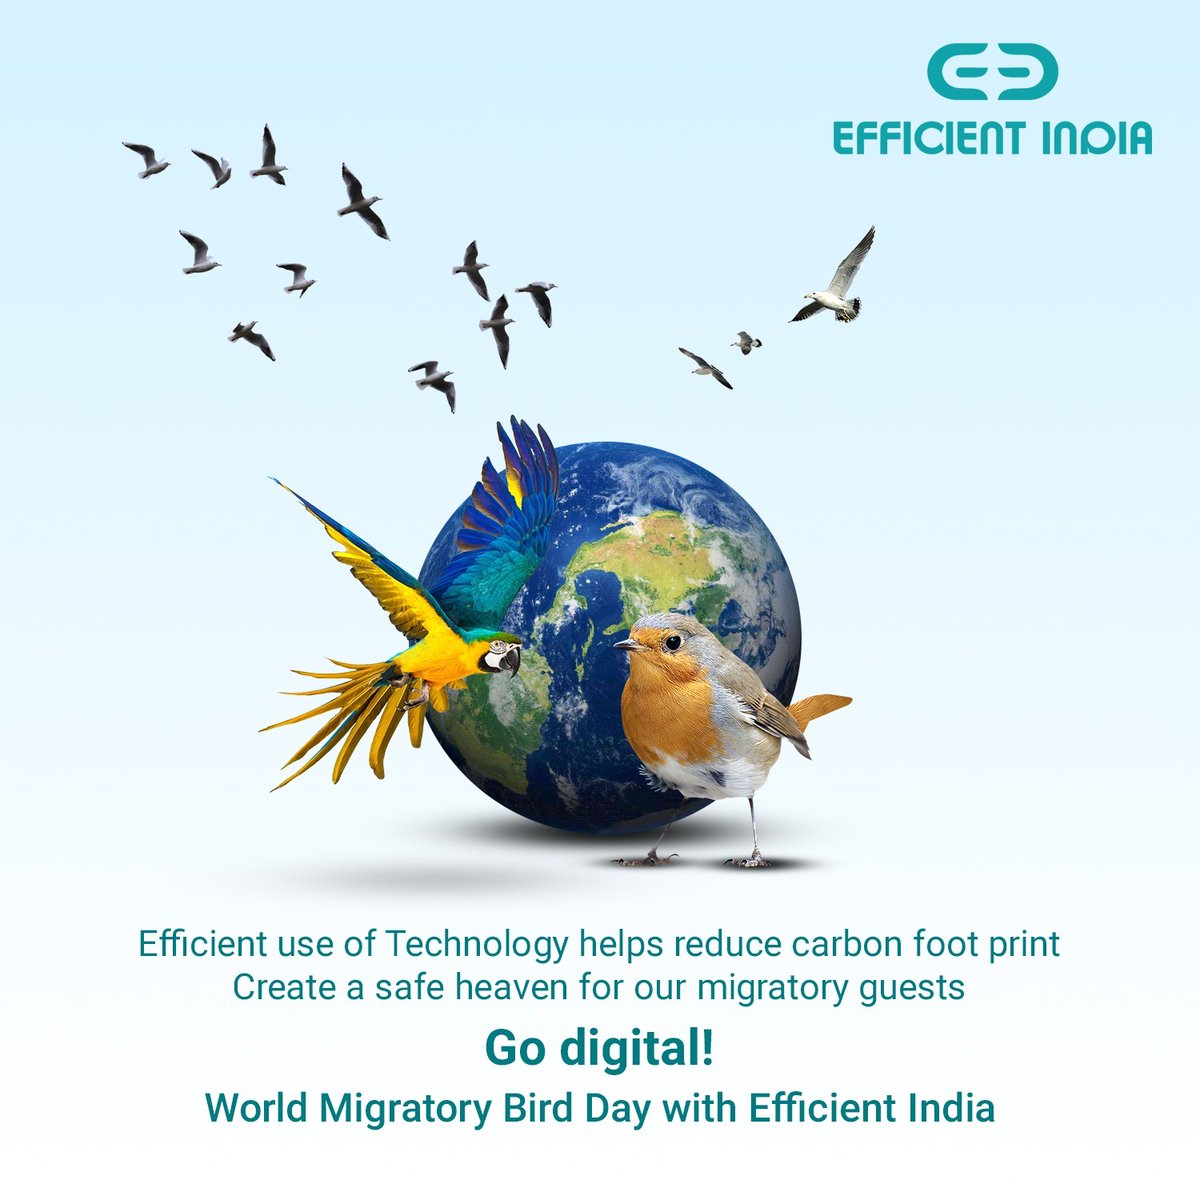 Efficient use of Technology helps reduce carbon foot print Create a safe heaven for our migratory guests Go digital! World Migratory Bird Day with Efficient India.

#Efficient #efficientindia #websitedesign #migratory #MigratoryBirdDay #migratoryspecies #bird #migratoryshore